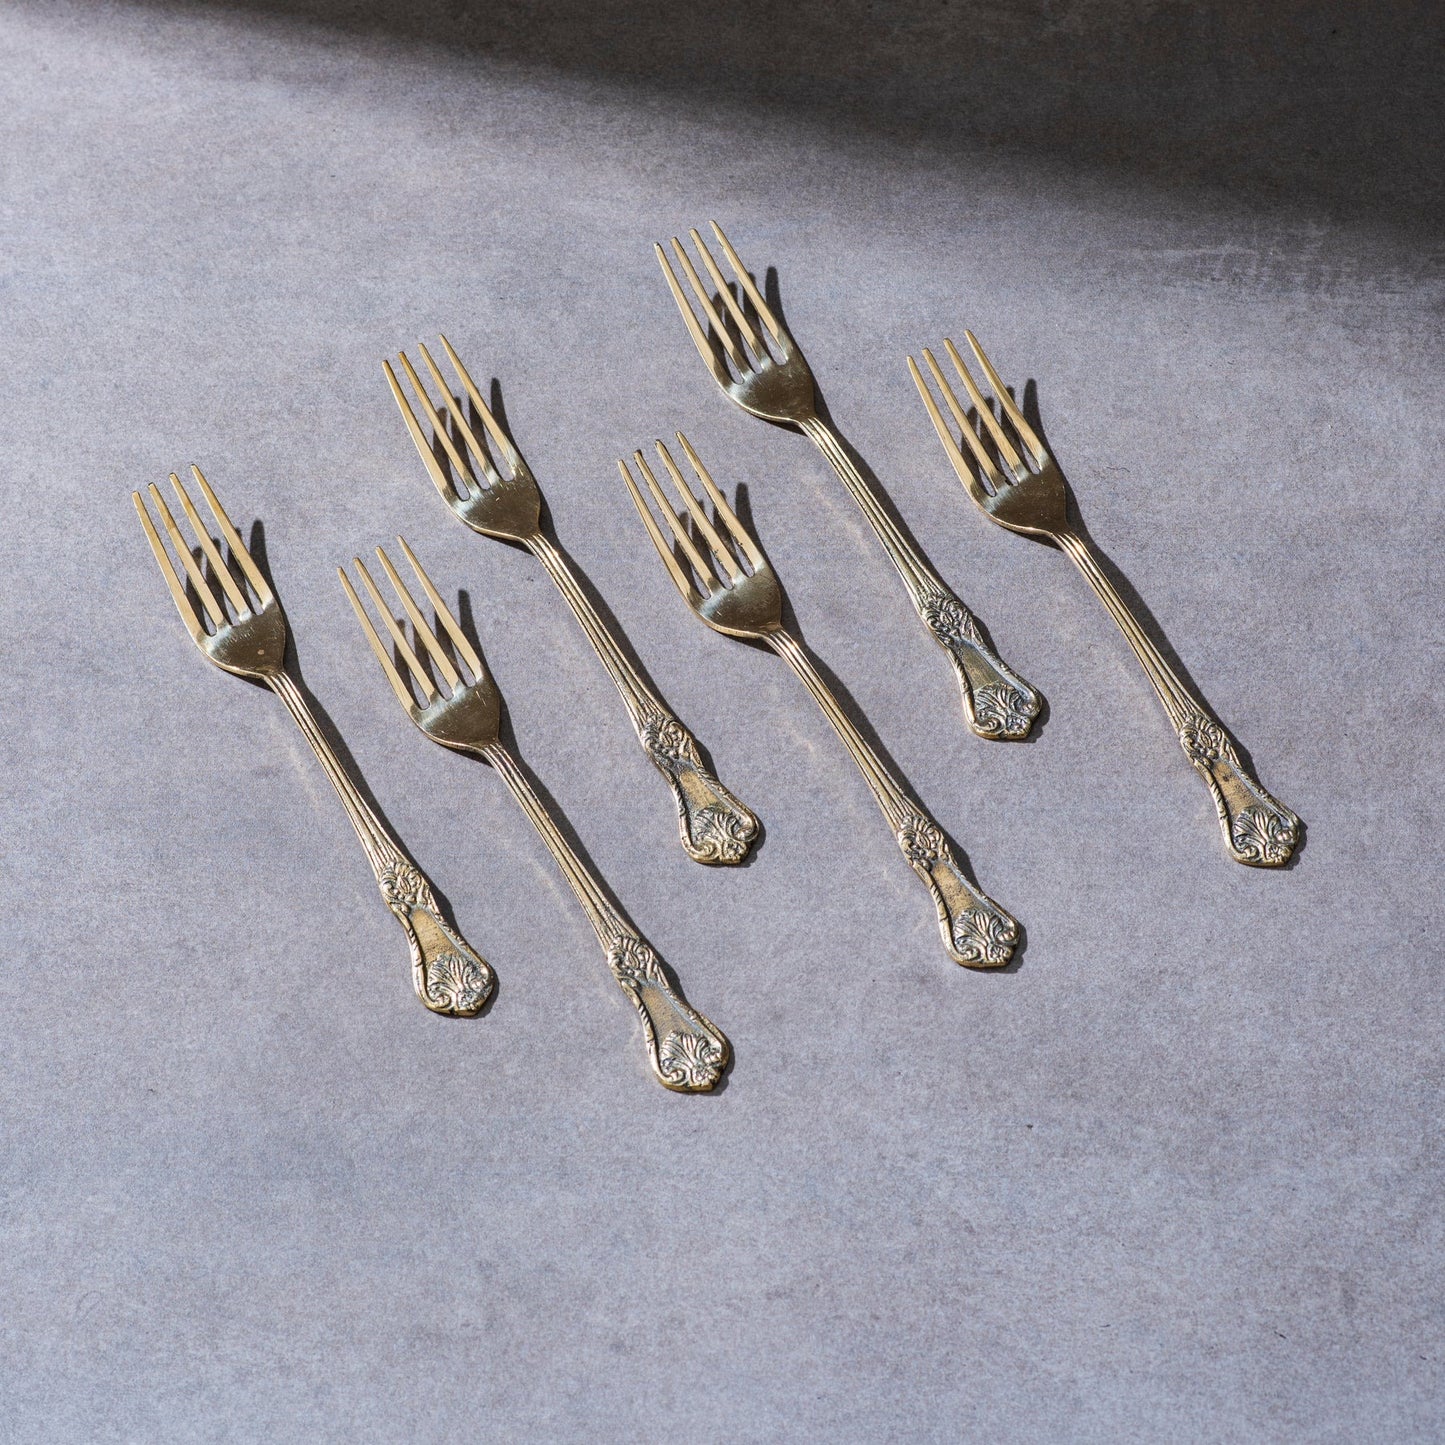 Gift Box Of Cutlery (Engraved Brass Forks & Spoons) | Brass Cookware